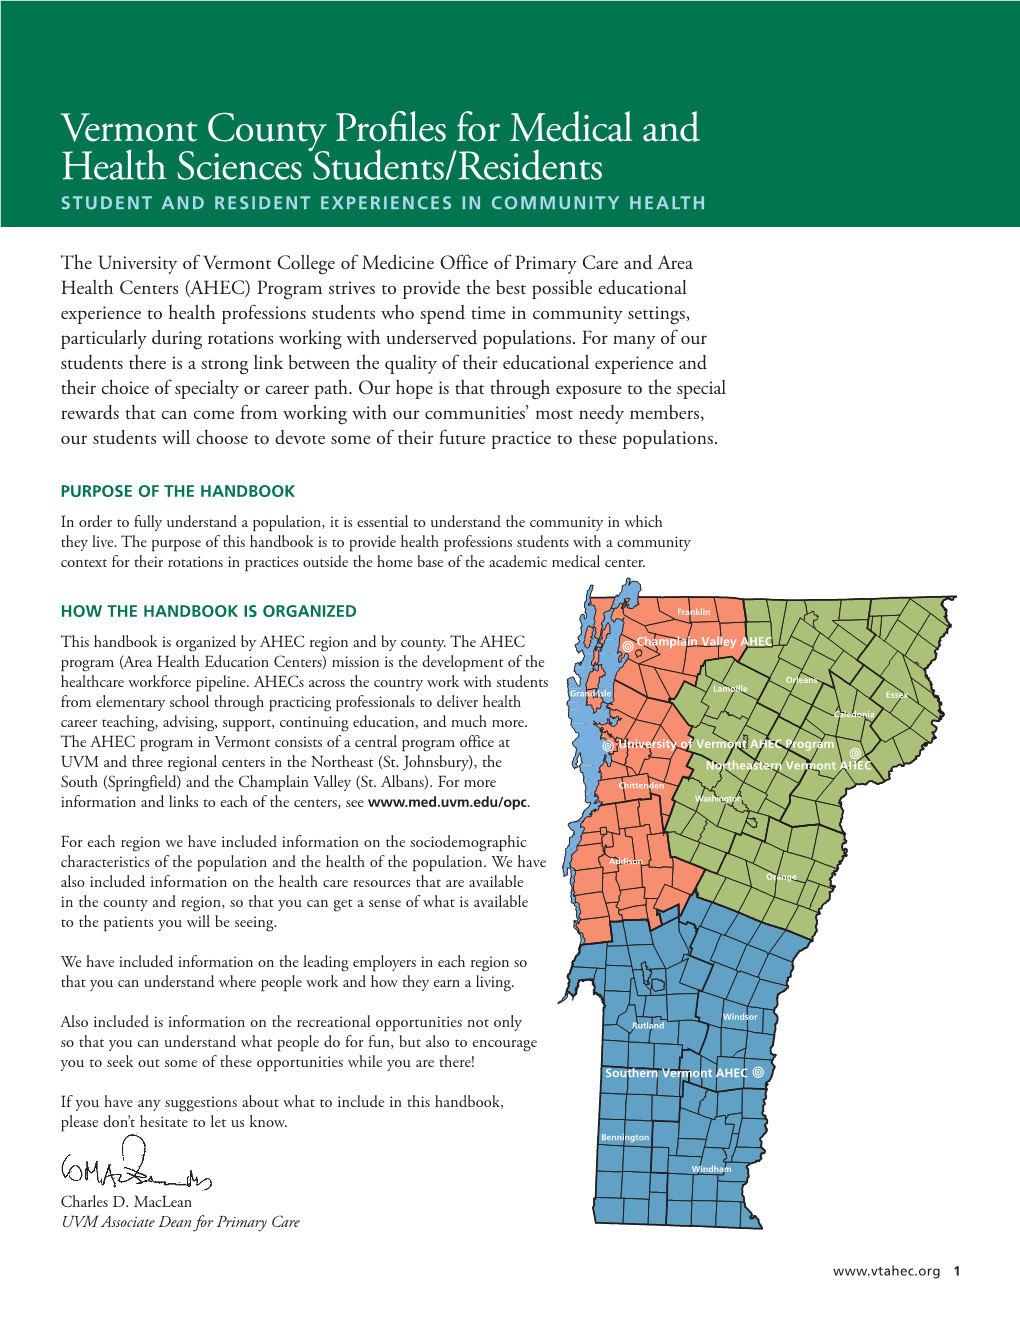 Vermont County Profiles for Medical and Health Sciences Students/Residents STUDENT and RESIDENT EXPERIENCES in COMMUNITY HEALTH